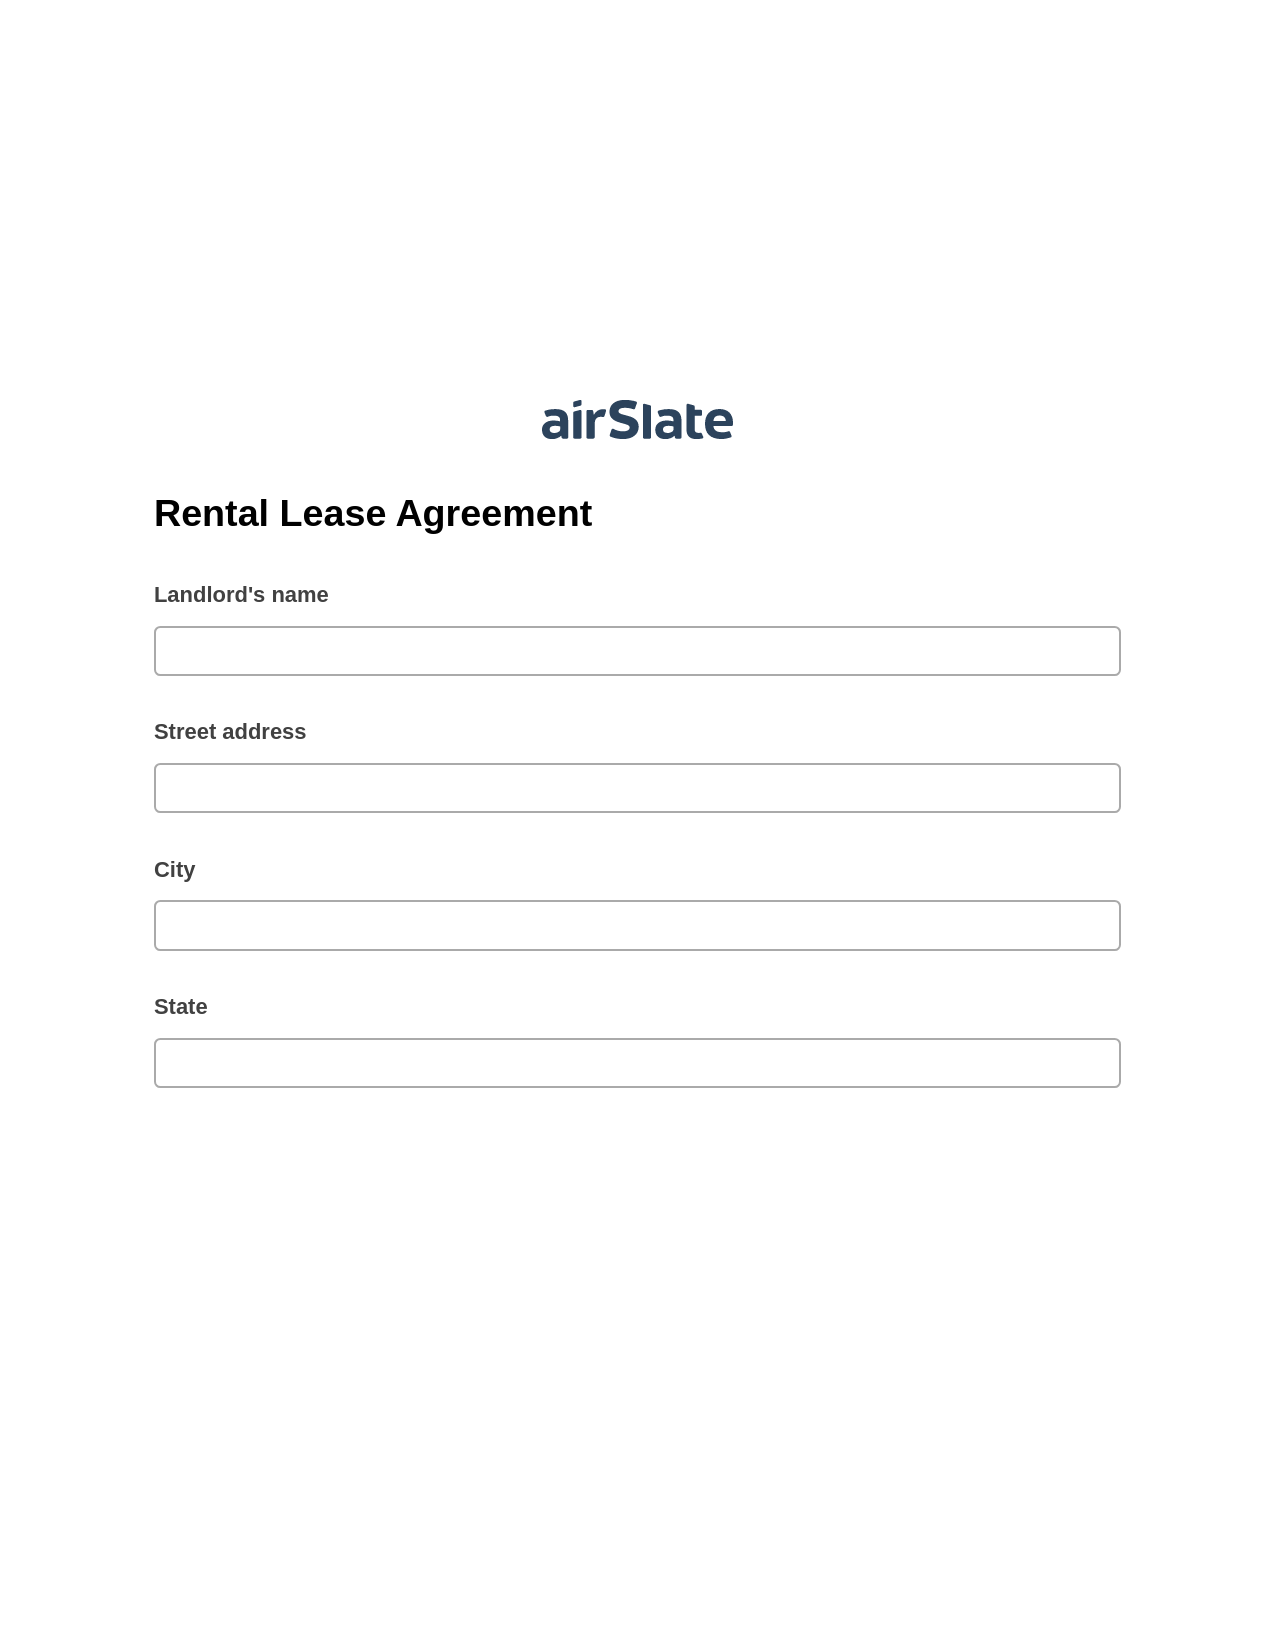 Rental Lease Agreement Pre-fill Dropdown from Airtable, Invoke Salesforce Process Bot, Export to NetSuite Record Bot